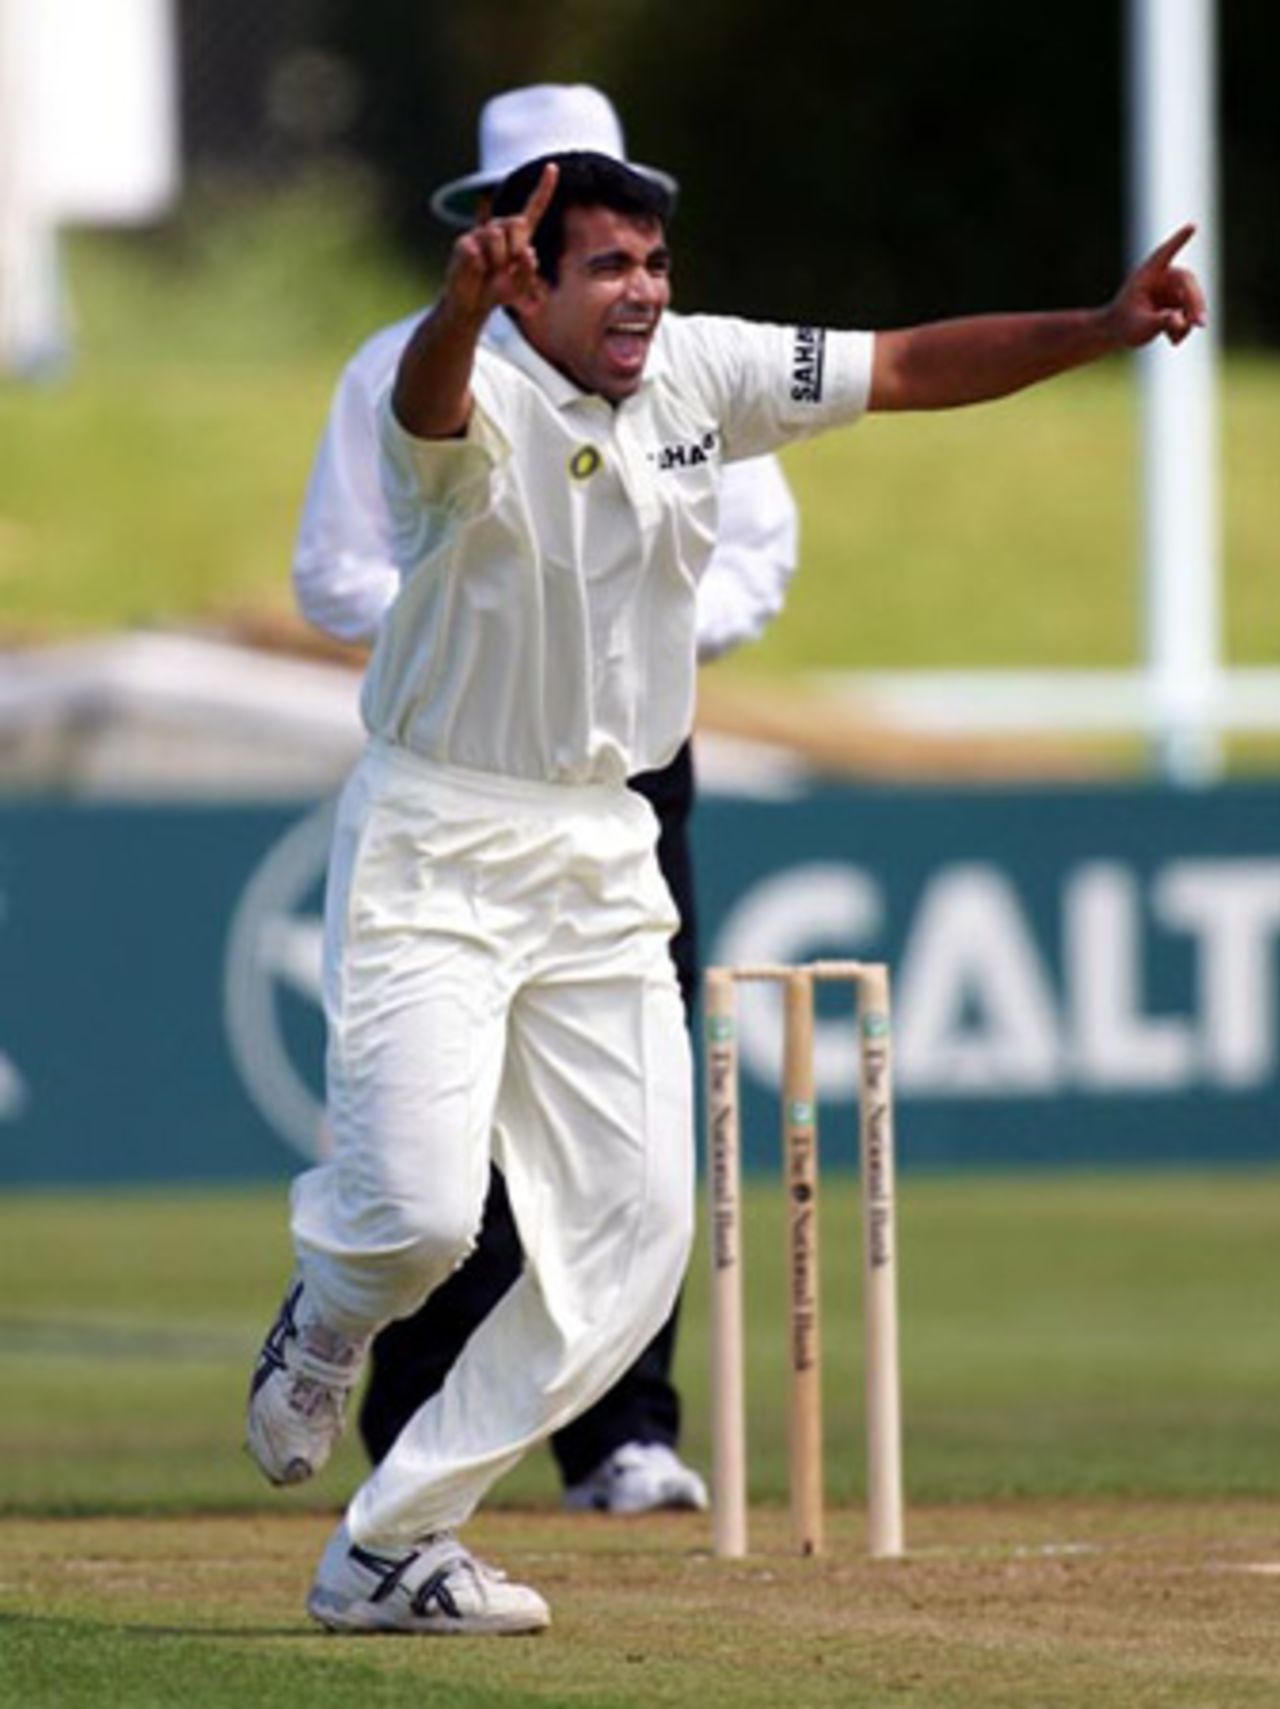 Indian bowler Zaheer Khan celebrates the dismissal of New Zealand batsman Lou Vincent, caught by Rahul Dravid at first slip off the bowling of Khan for three. 2nd Test: New Zealand v India at Westpac Park, Hamilton, 19-23 December 2002 (21 December 2002).